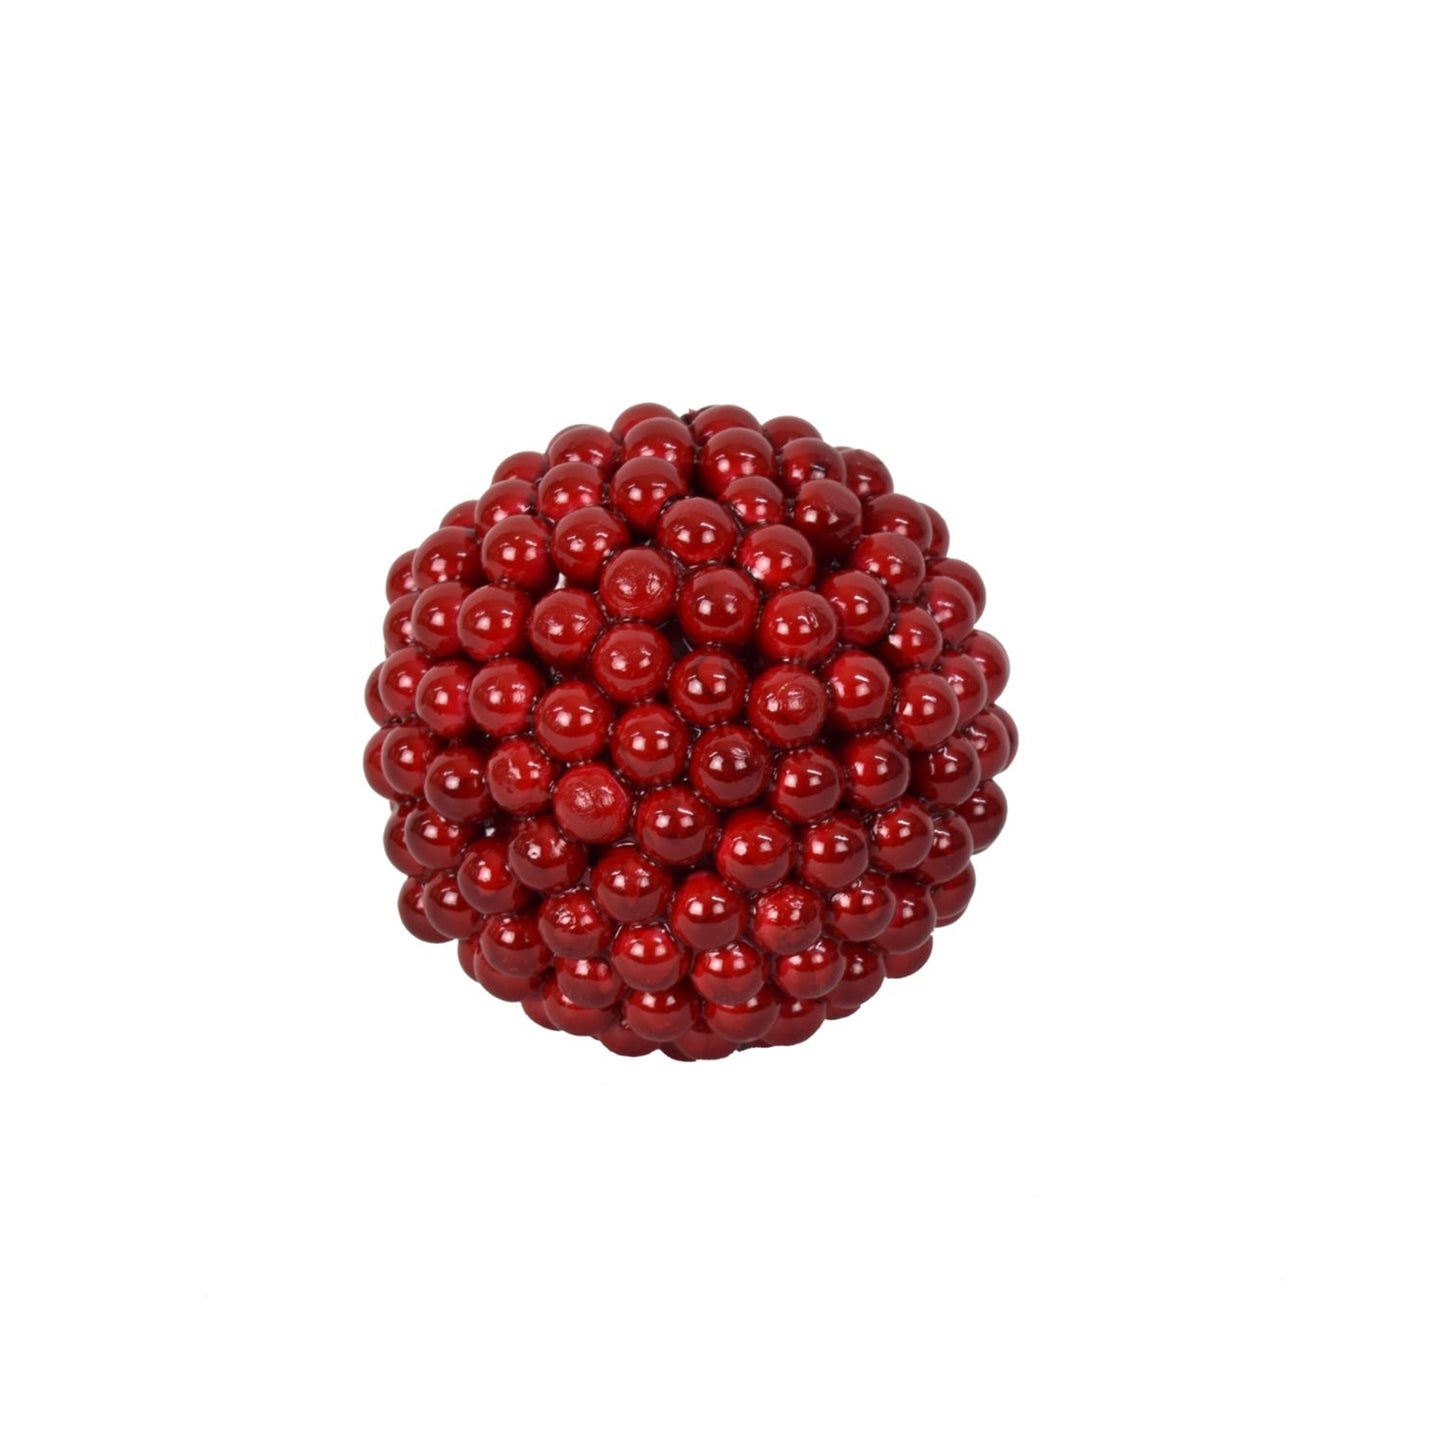 4" Shiny Goose Berry Ball Ornament in Red | TA